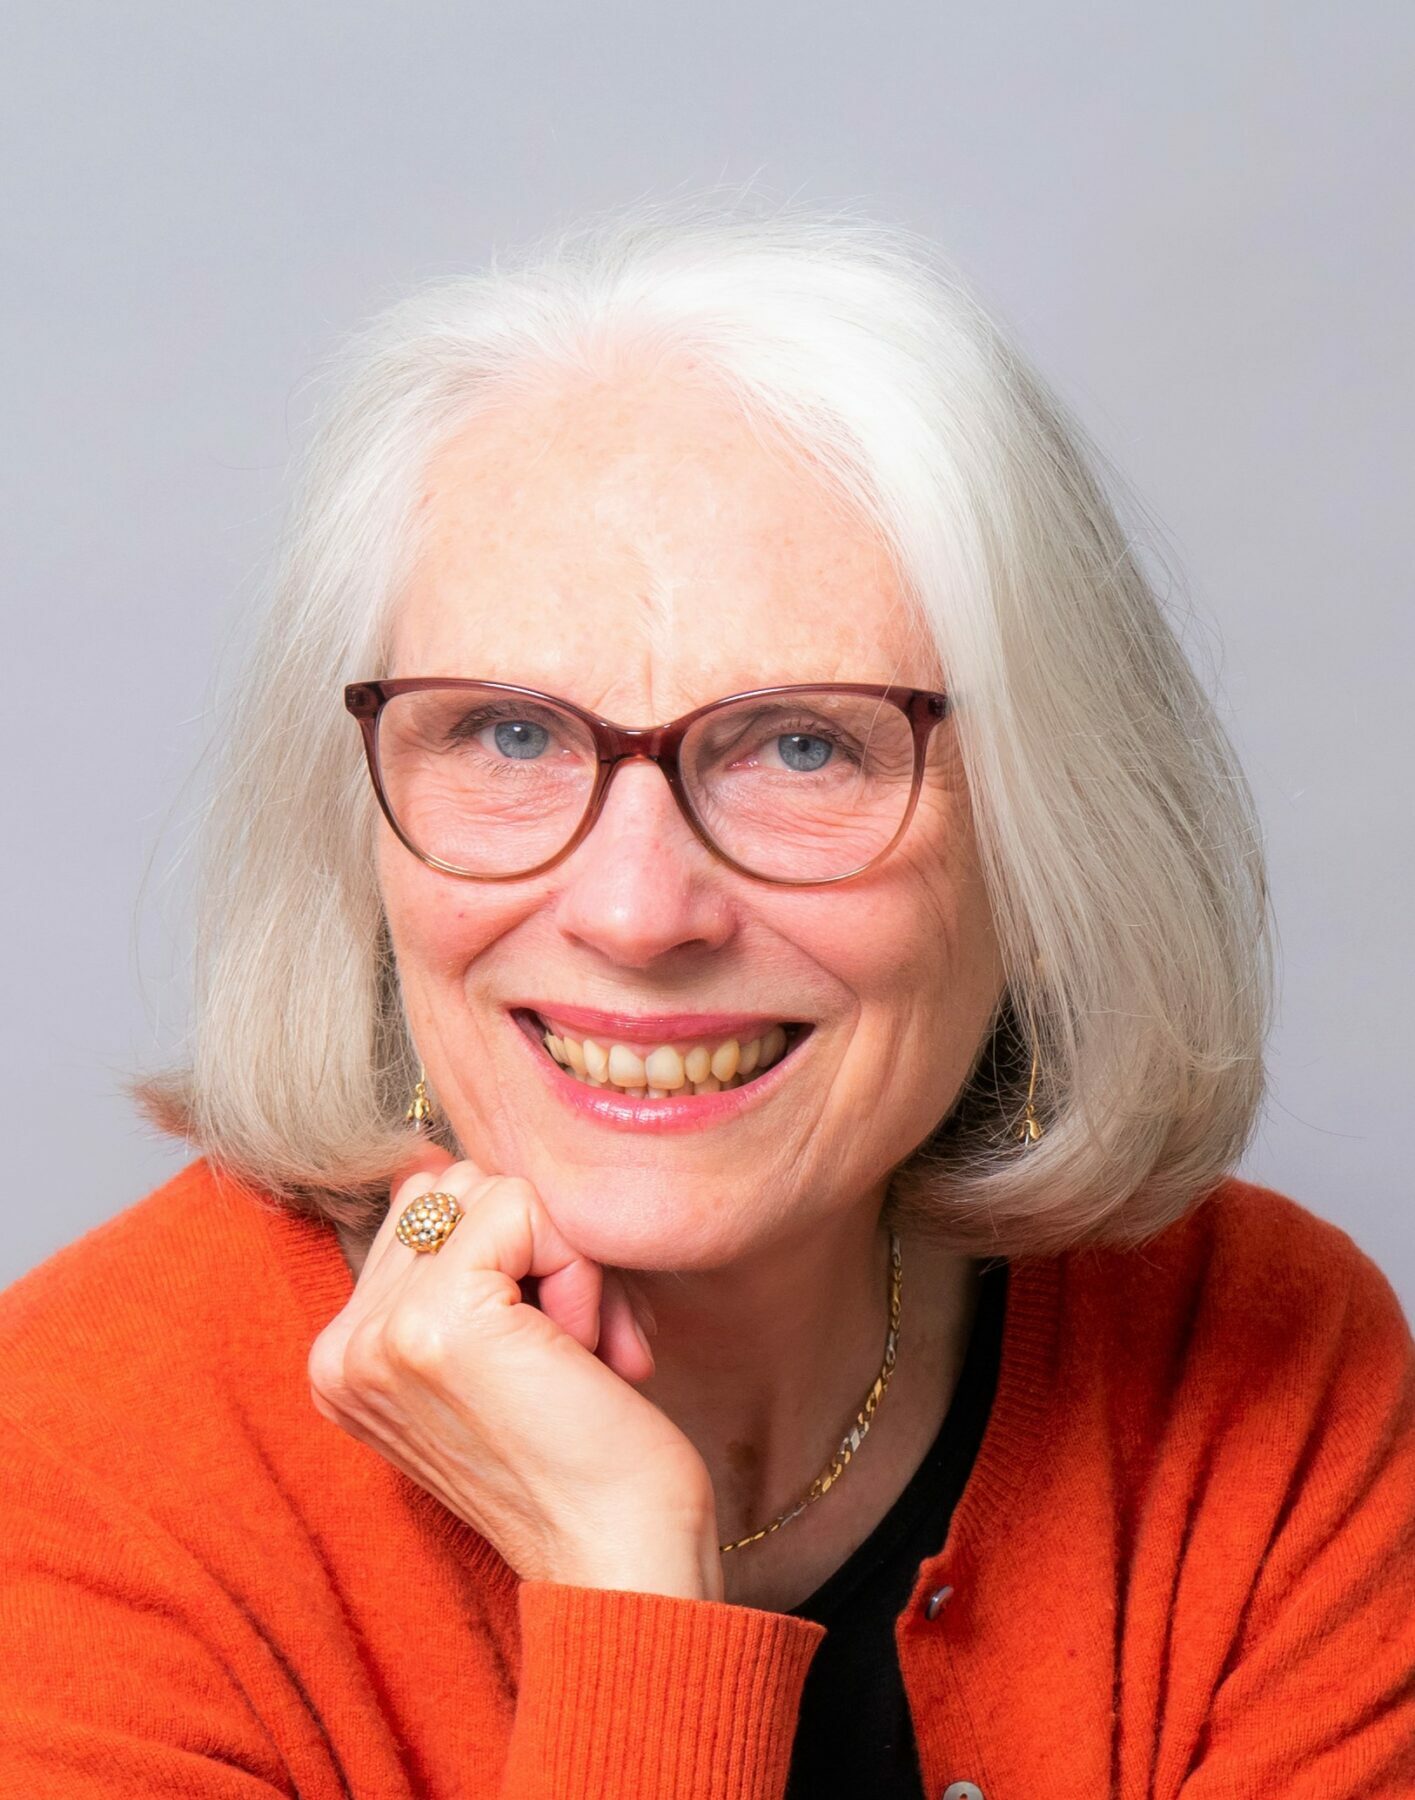 A woman with chin-length straight white hair and red rimmed glasses smiles, resting her chin on her fist